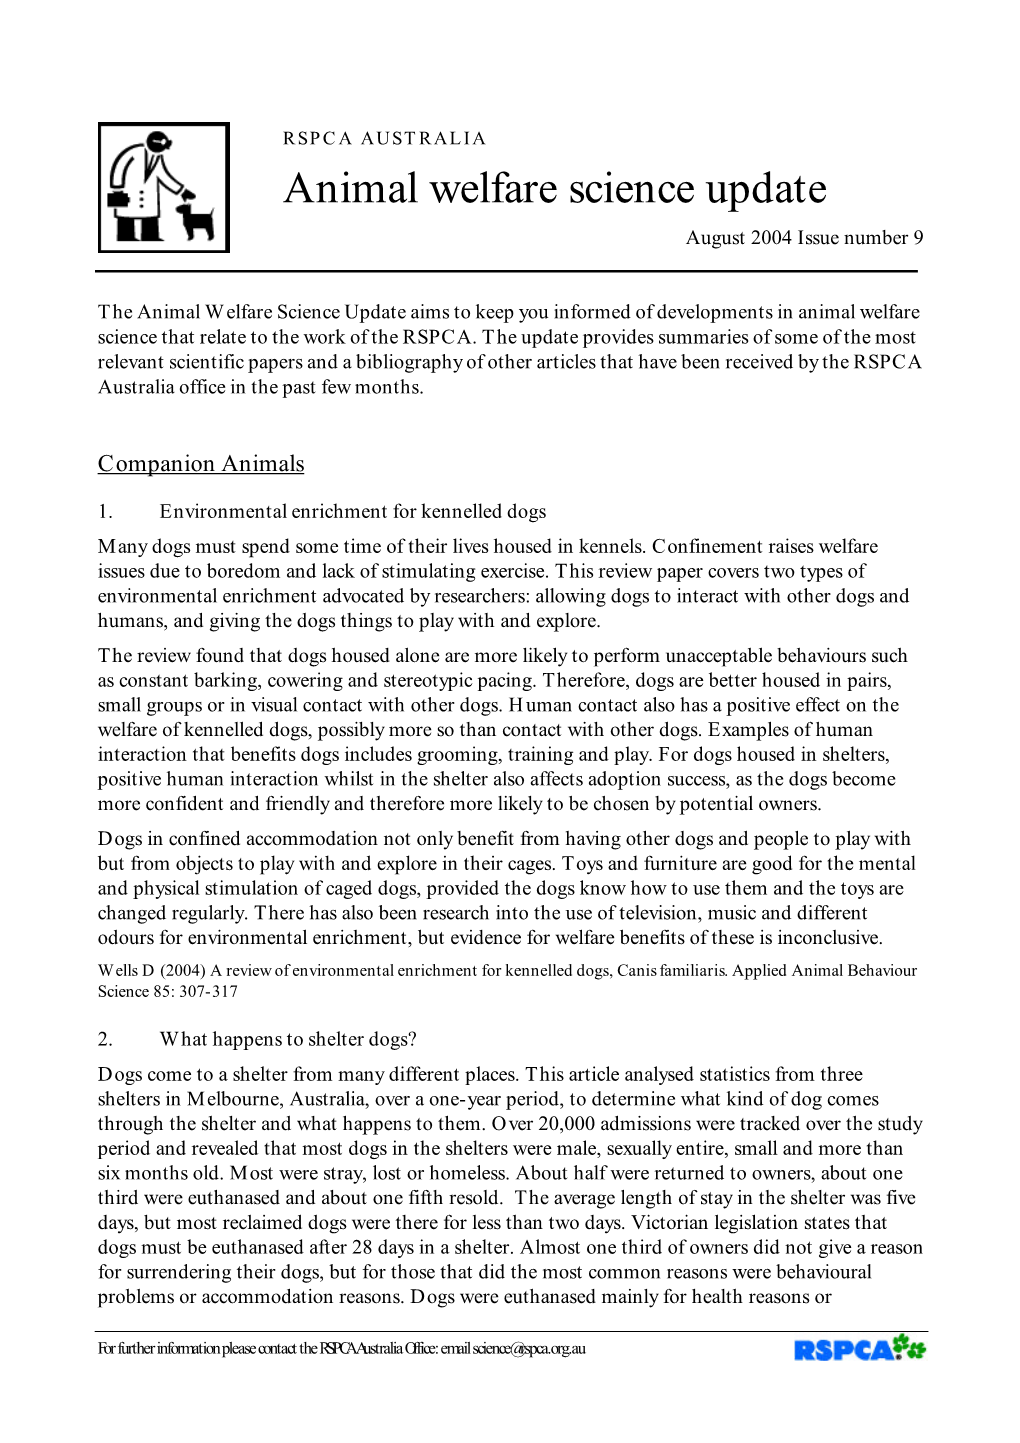 Animal Welfare Science Update August 2004 Issue Number 9